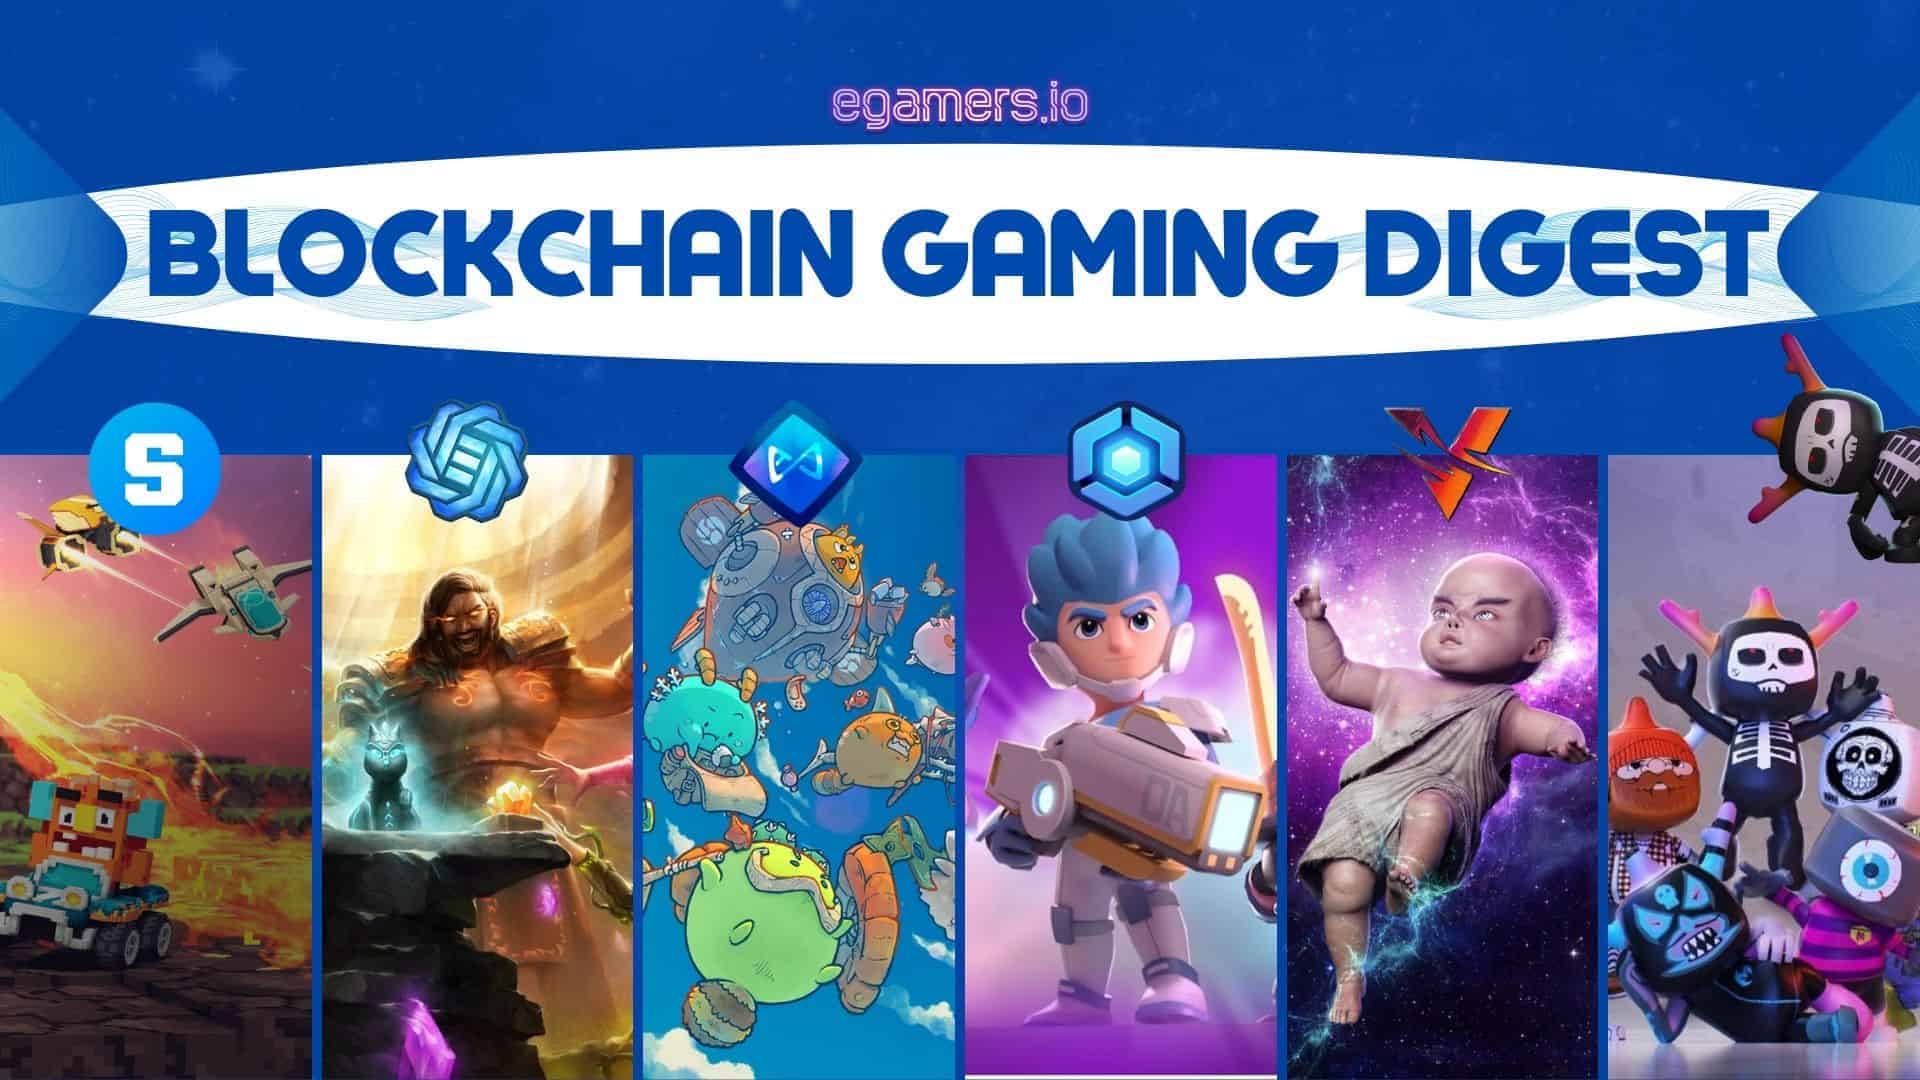 BLOCKCHAIN GAMING DIGEST new Socialize, Play and Create. The three words represent the Chainers NFT collection on the Solana blockchain.